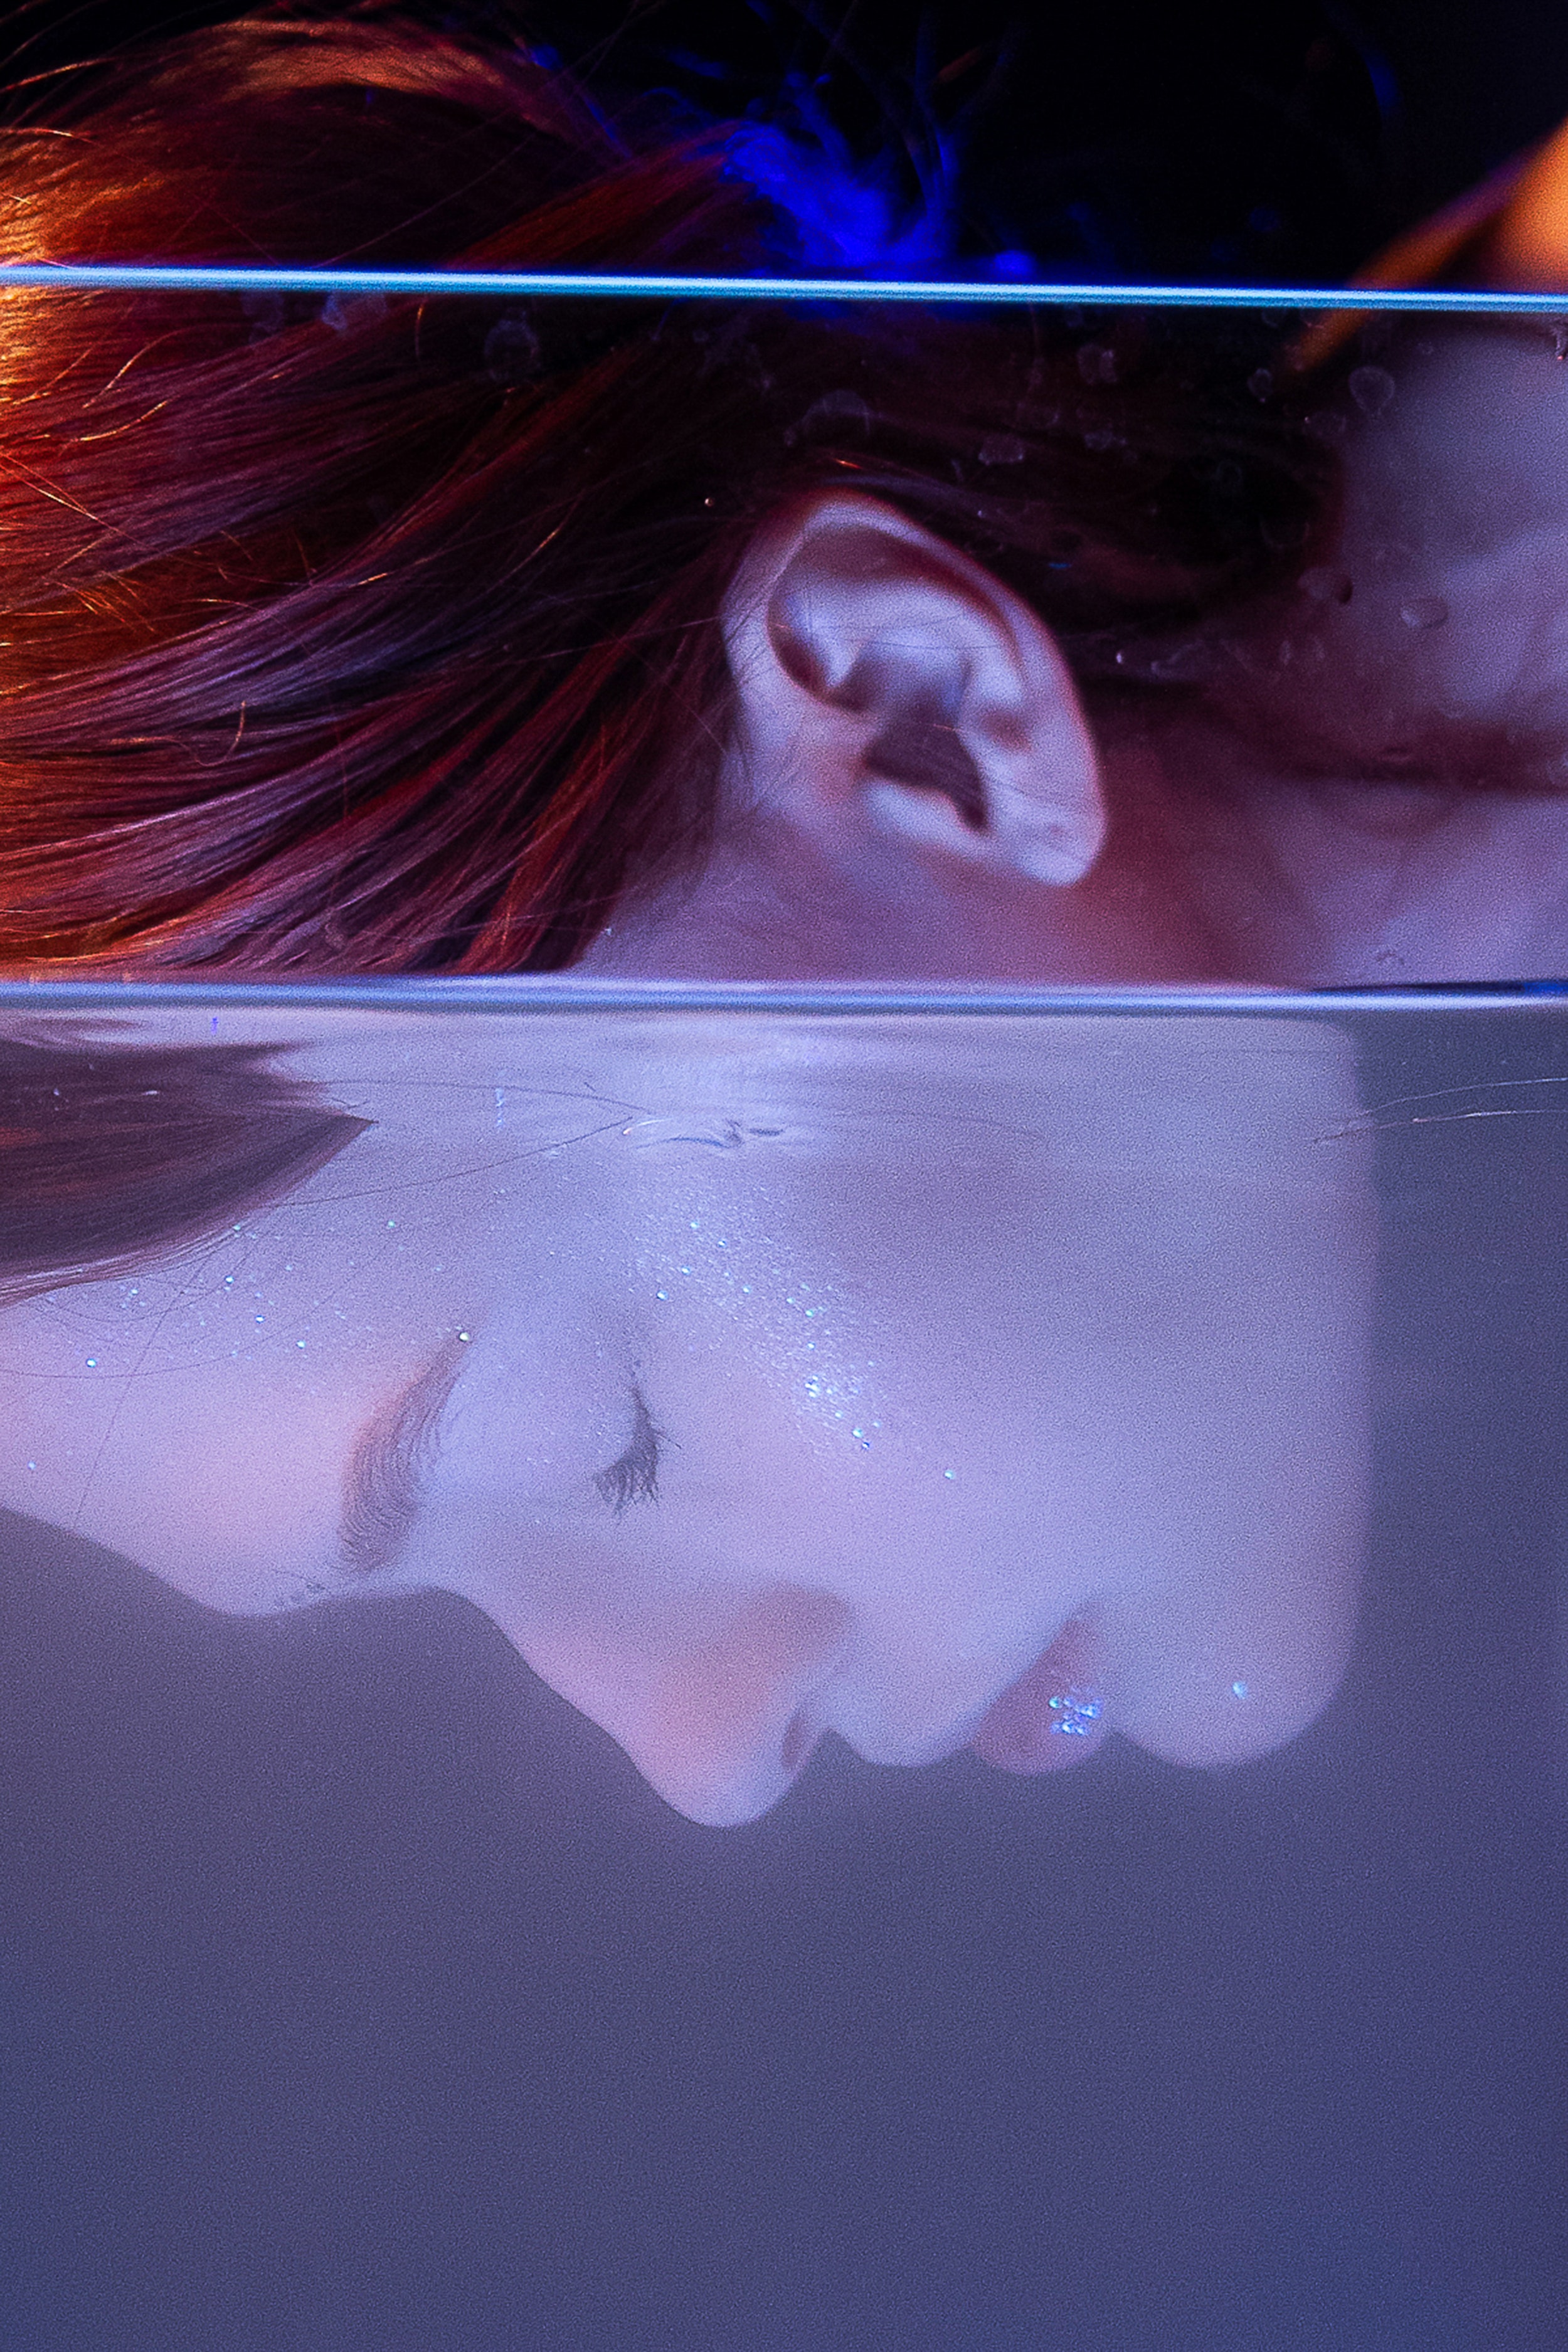 A woman underwater with her eyes closed. | Source: Pexels